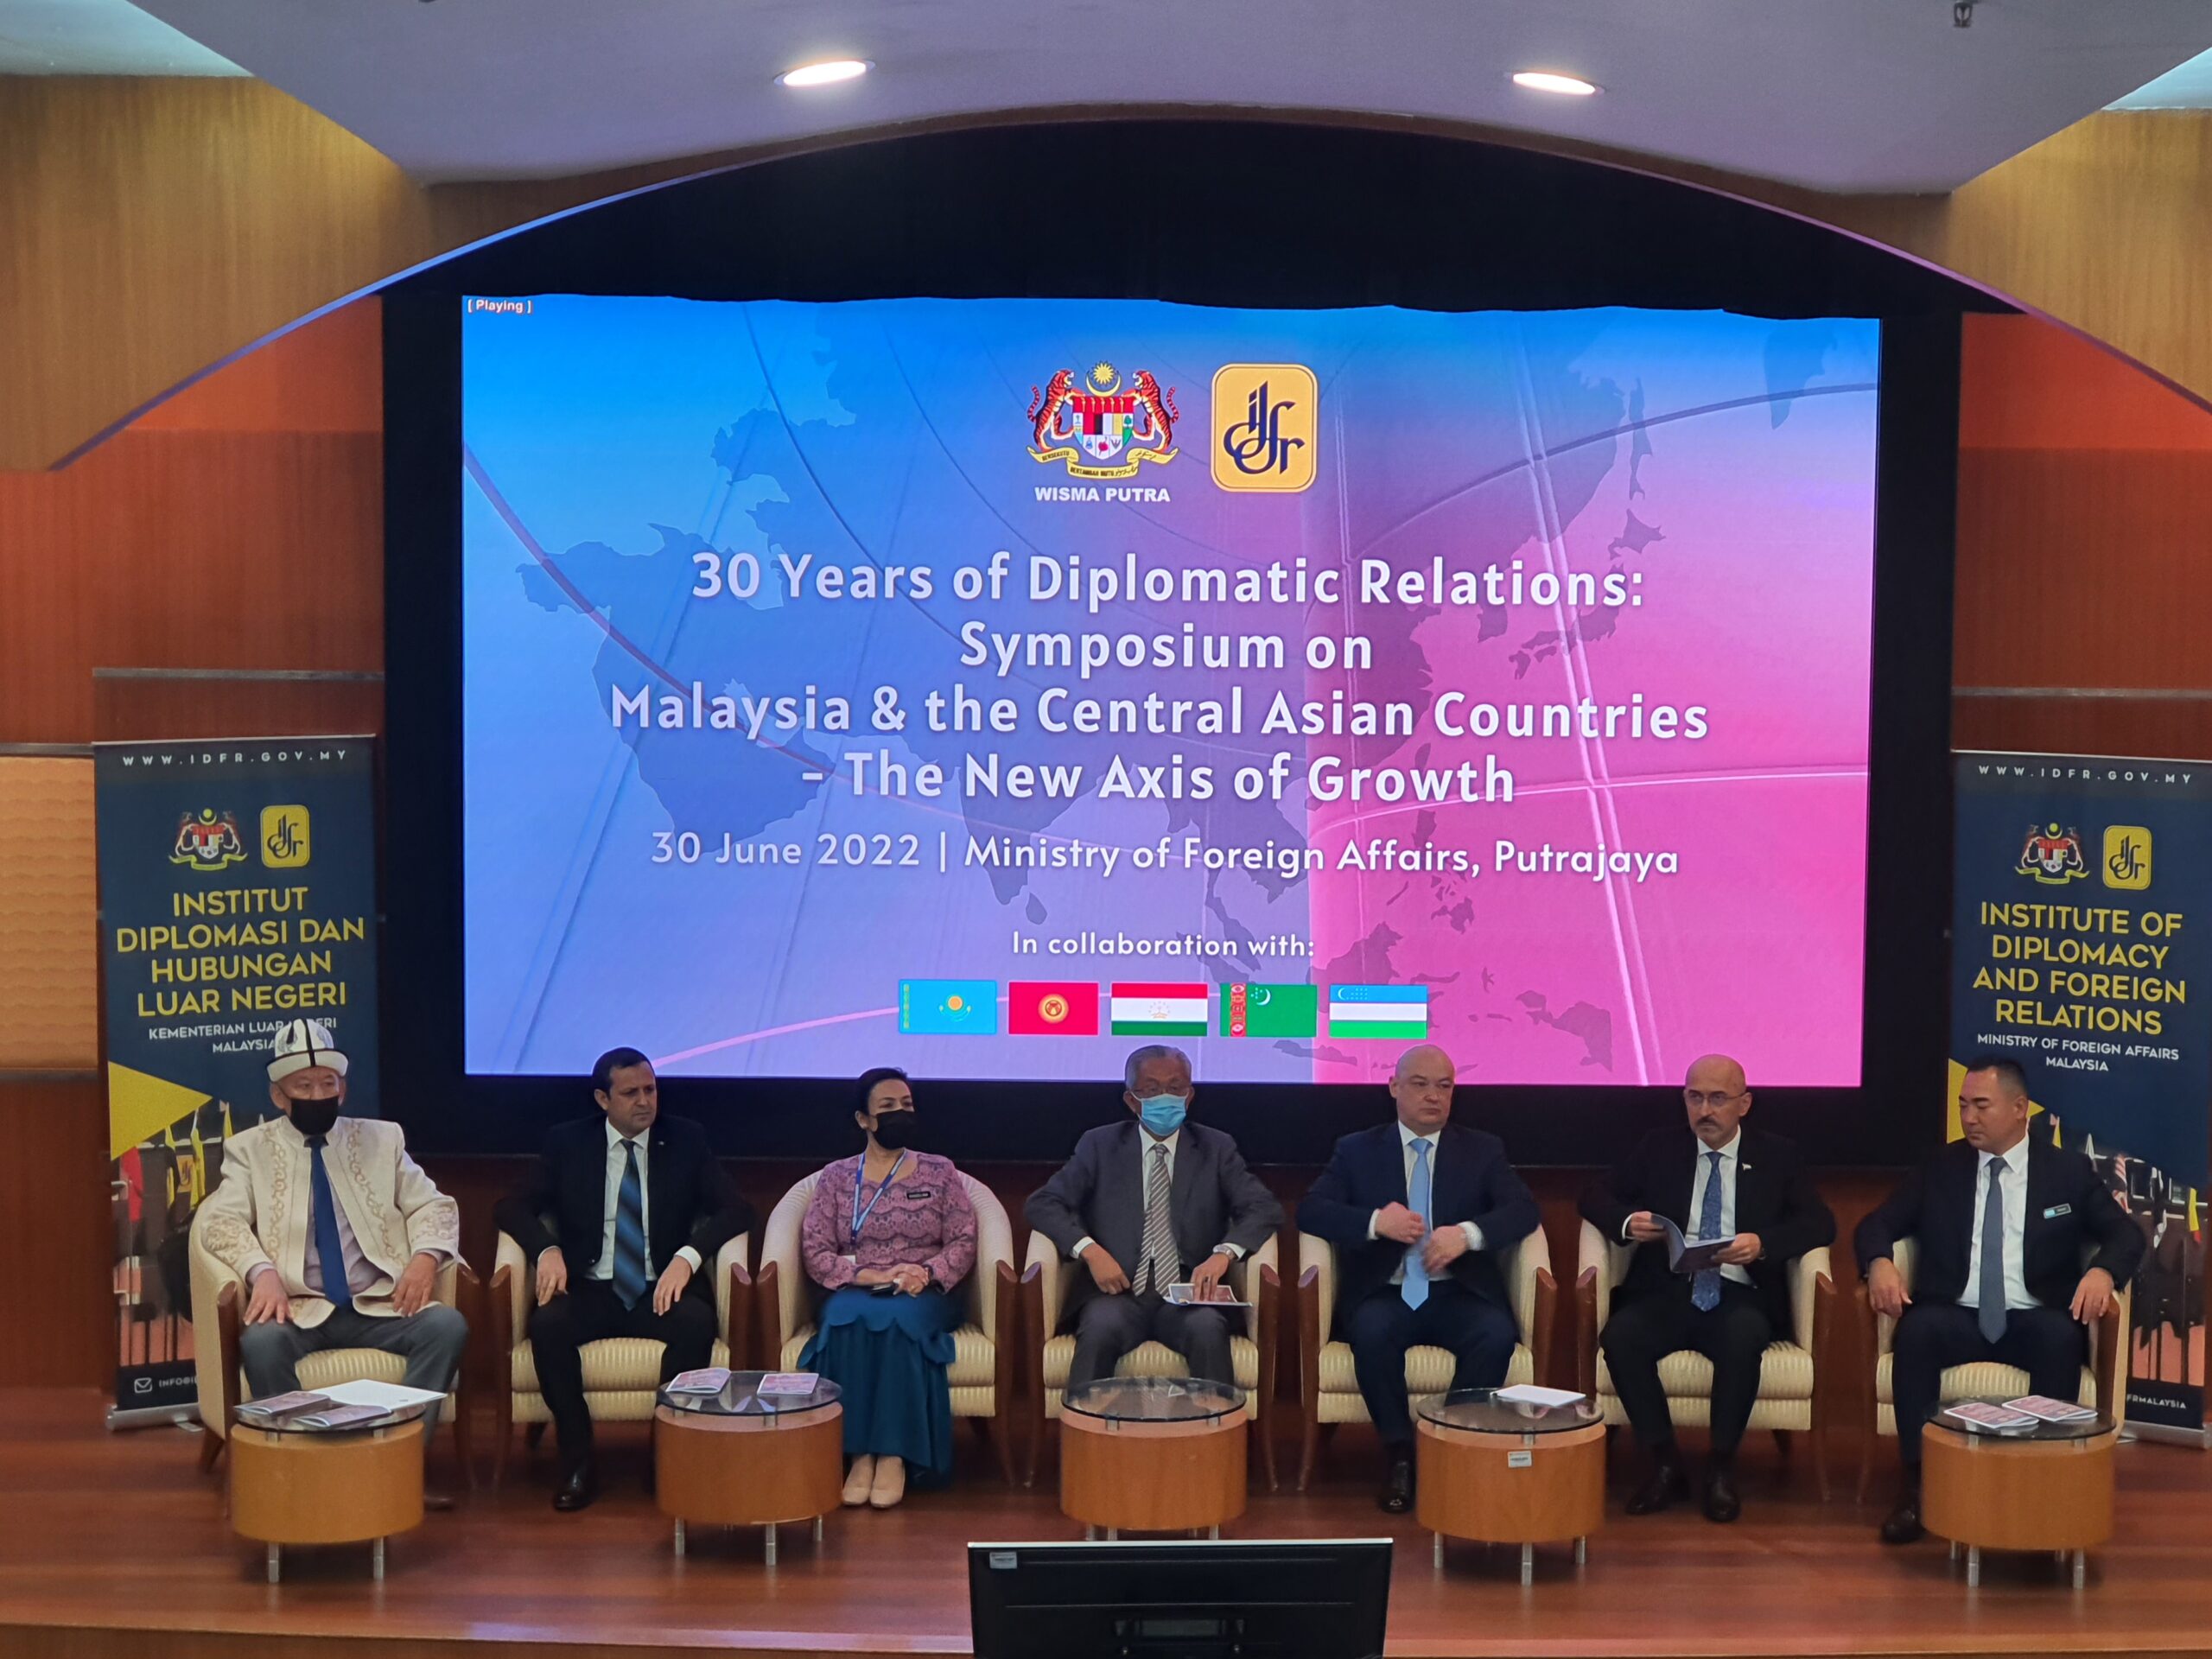 Embassy of Tajikistan celebrating the 30th anniversary of the establishment of diplomatic relations with Malaysia